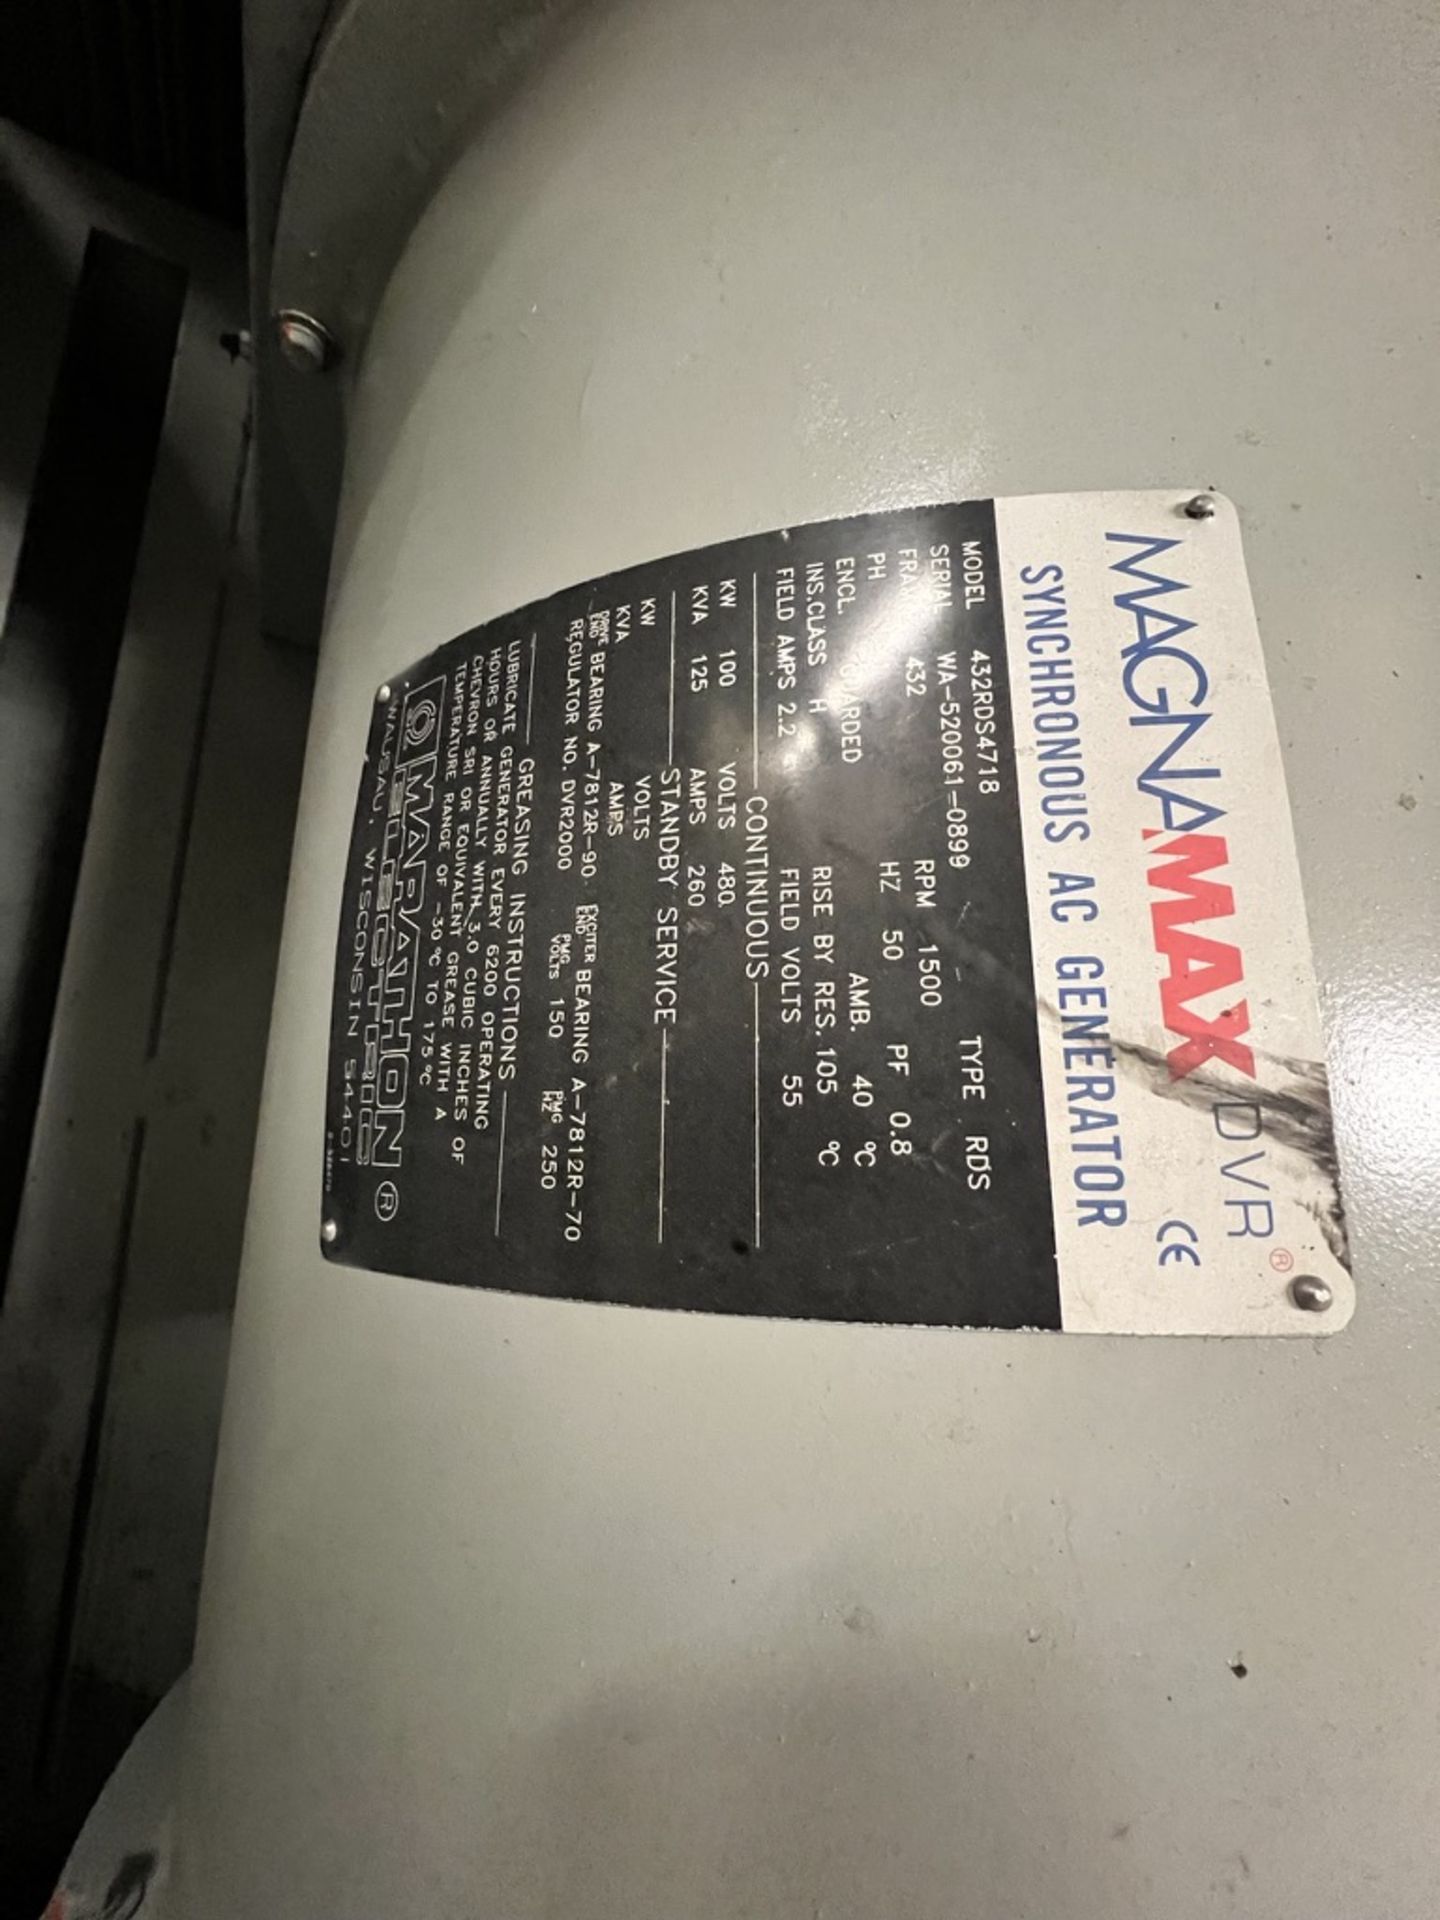 MAGNAMAX SYCHRONOUS AC GENERATOR, MODEL 432RDS4718, S/N WA-520061-0899, 50 HZ, 1500 RPM, 100 KW, 125 - Image 15 of 17